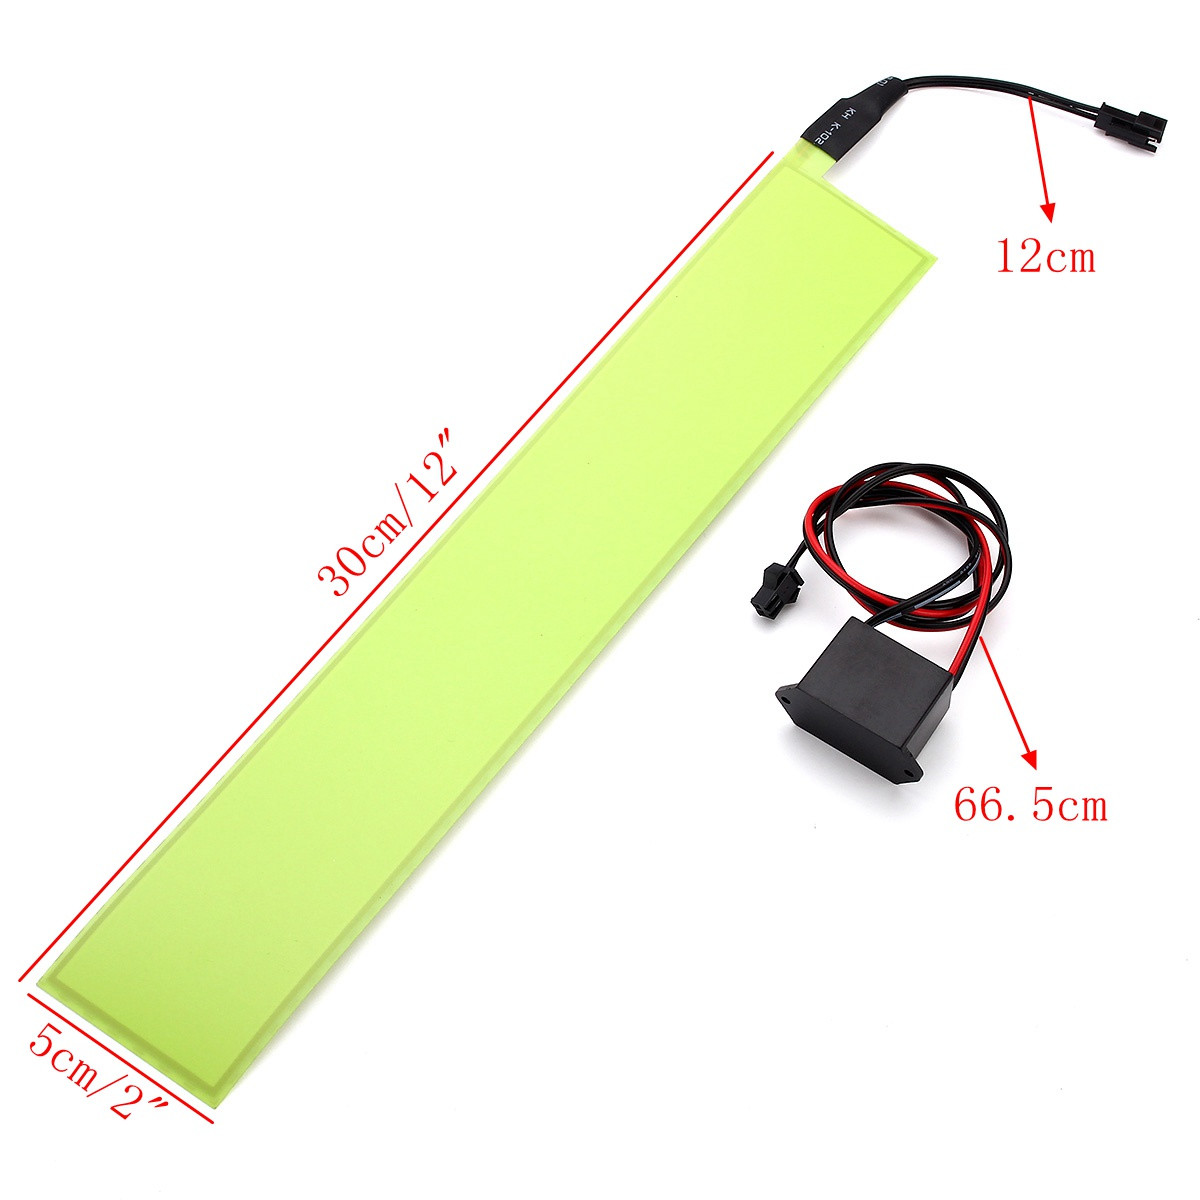 12x2-Inch-12V-Flexible-Electroluminescent-Tape-EL-Panel-Backlight-Decorations-Light-with-Inverter-1114097